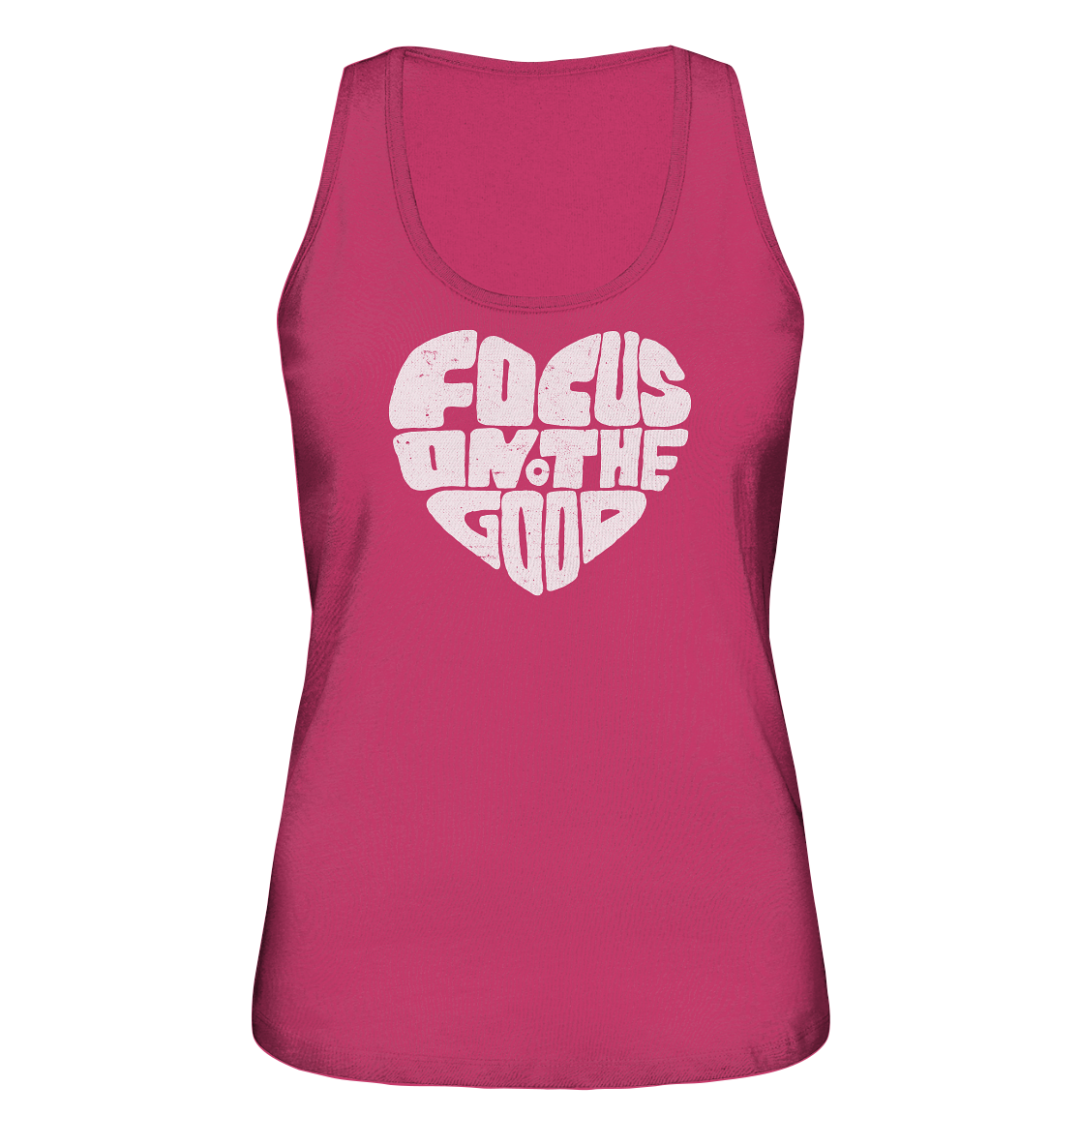 front ladies organic tank top c63a6a 1116x 1 Focus on the Good - Ladies Organic Tank-Top